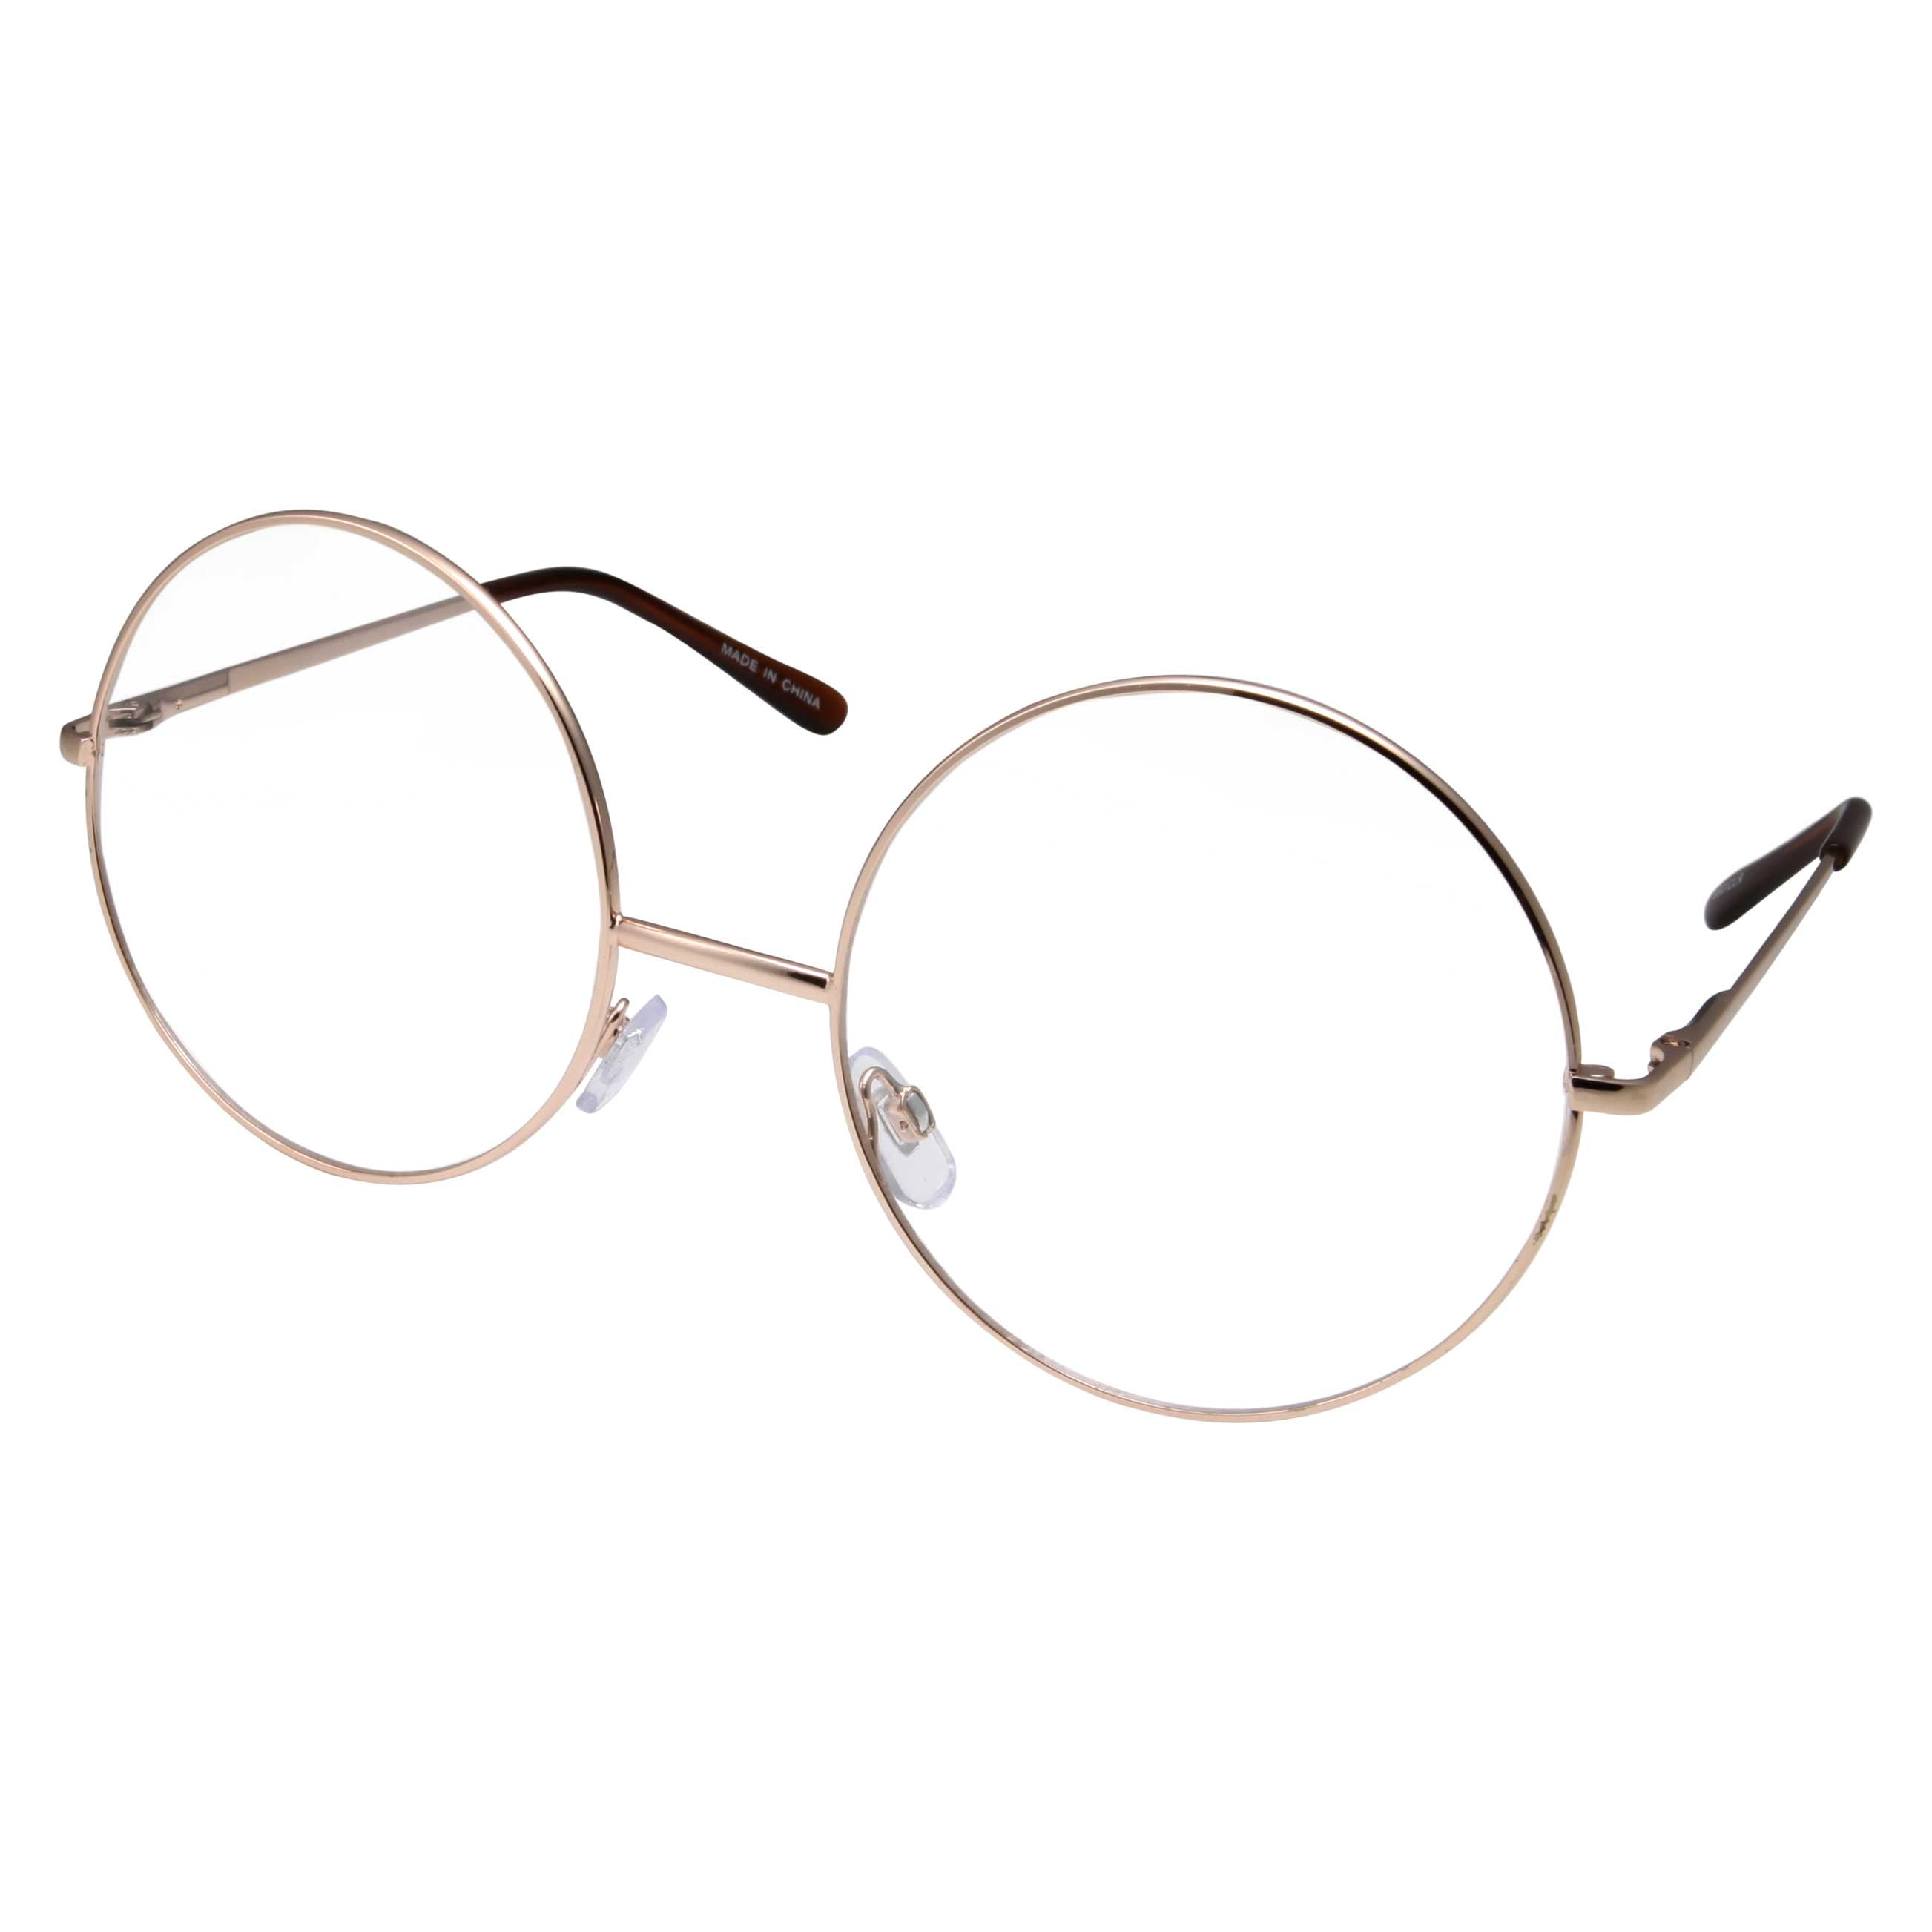 Grinderpunch Extra Large Round Circle Metal Frame Clear Lens Glasses 